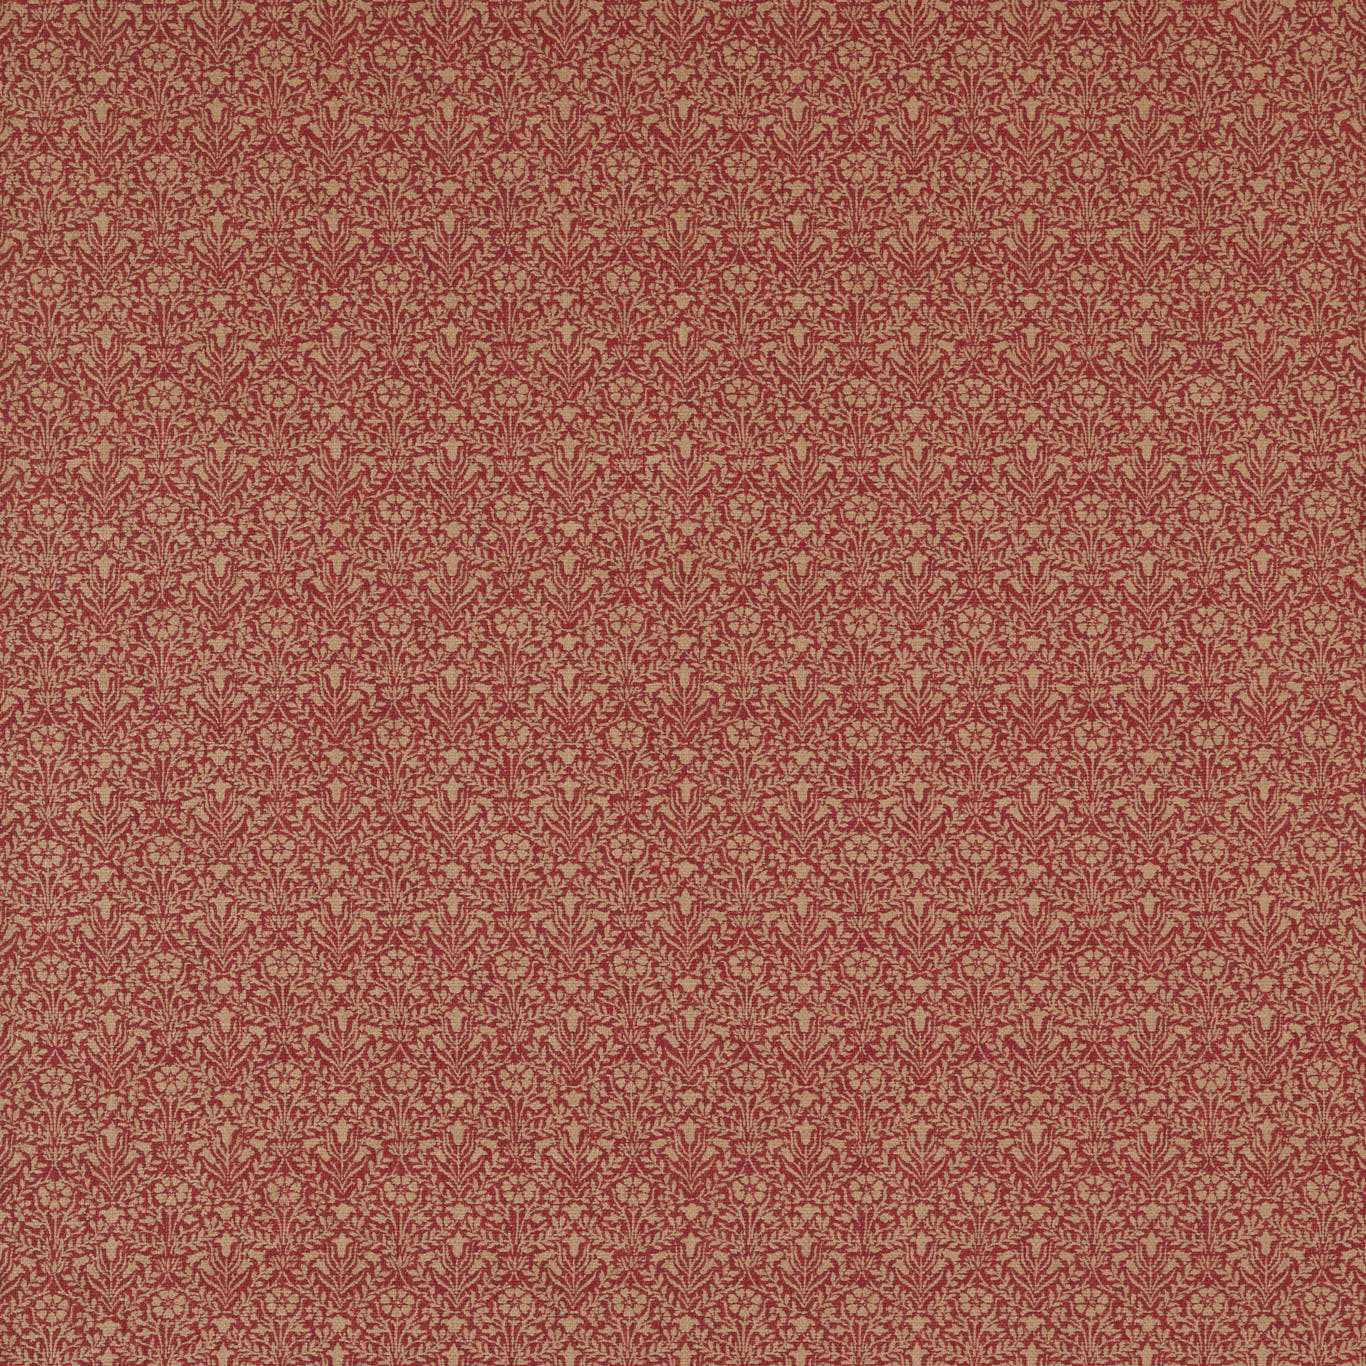 Bellflowers Weave Russet Fabric by MOR